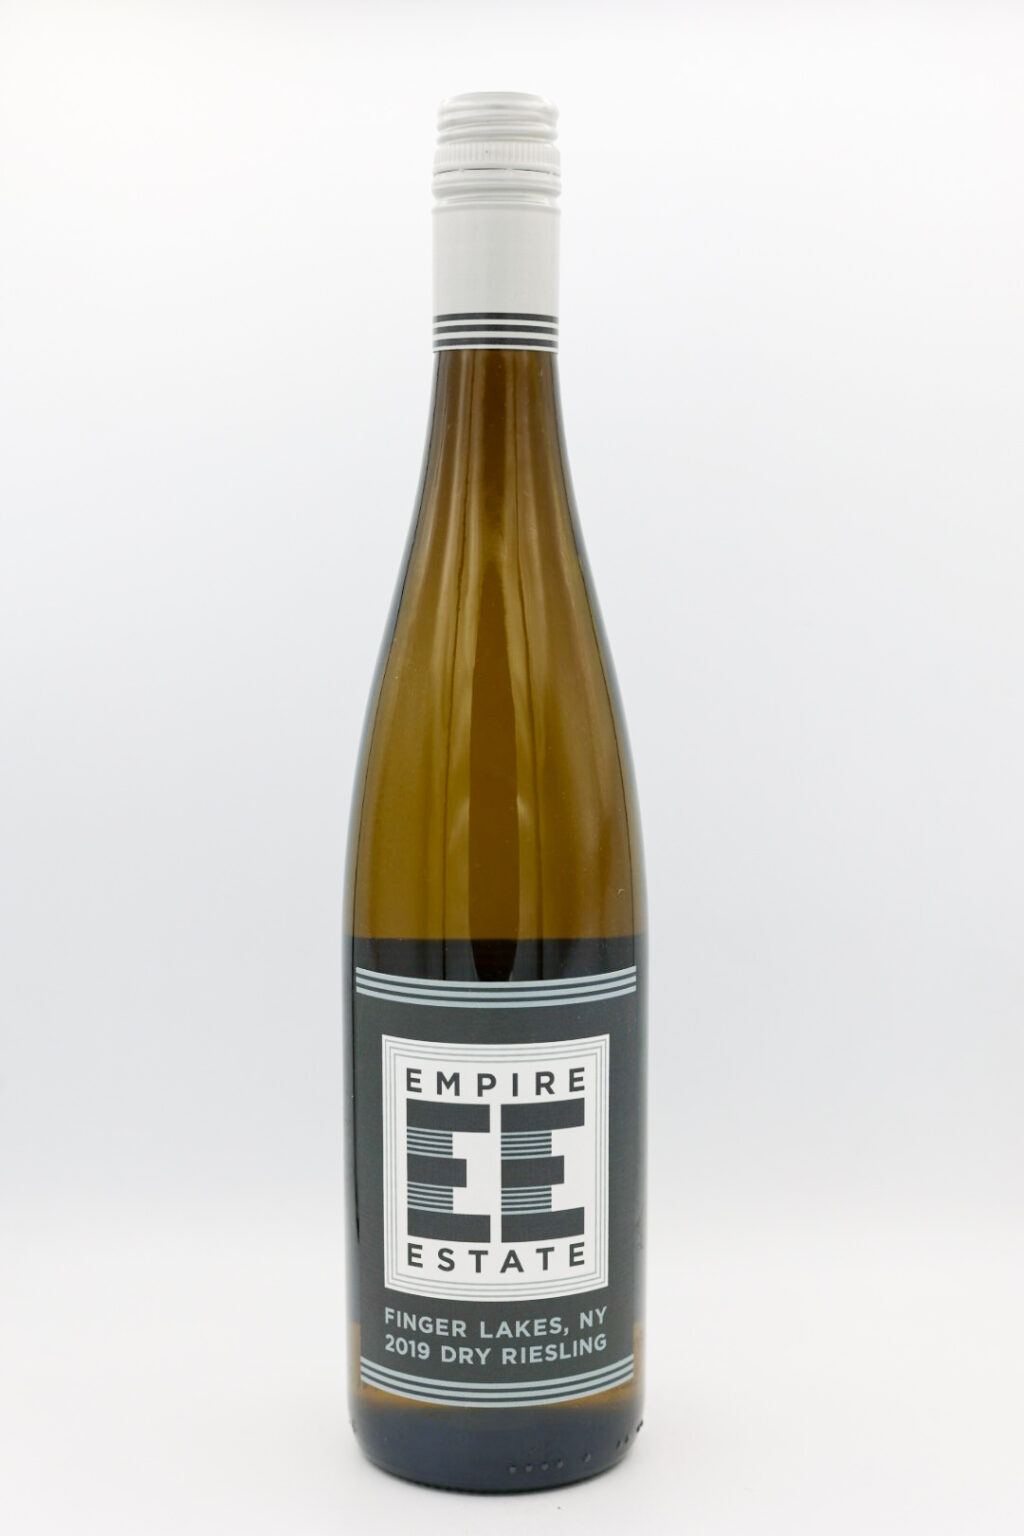 Empire Estate Dry Riesling 2019